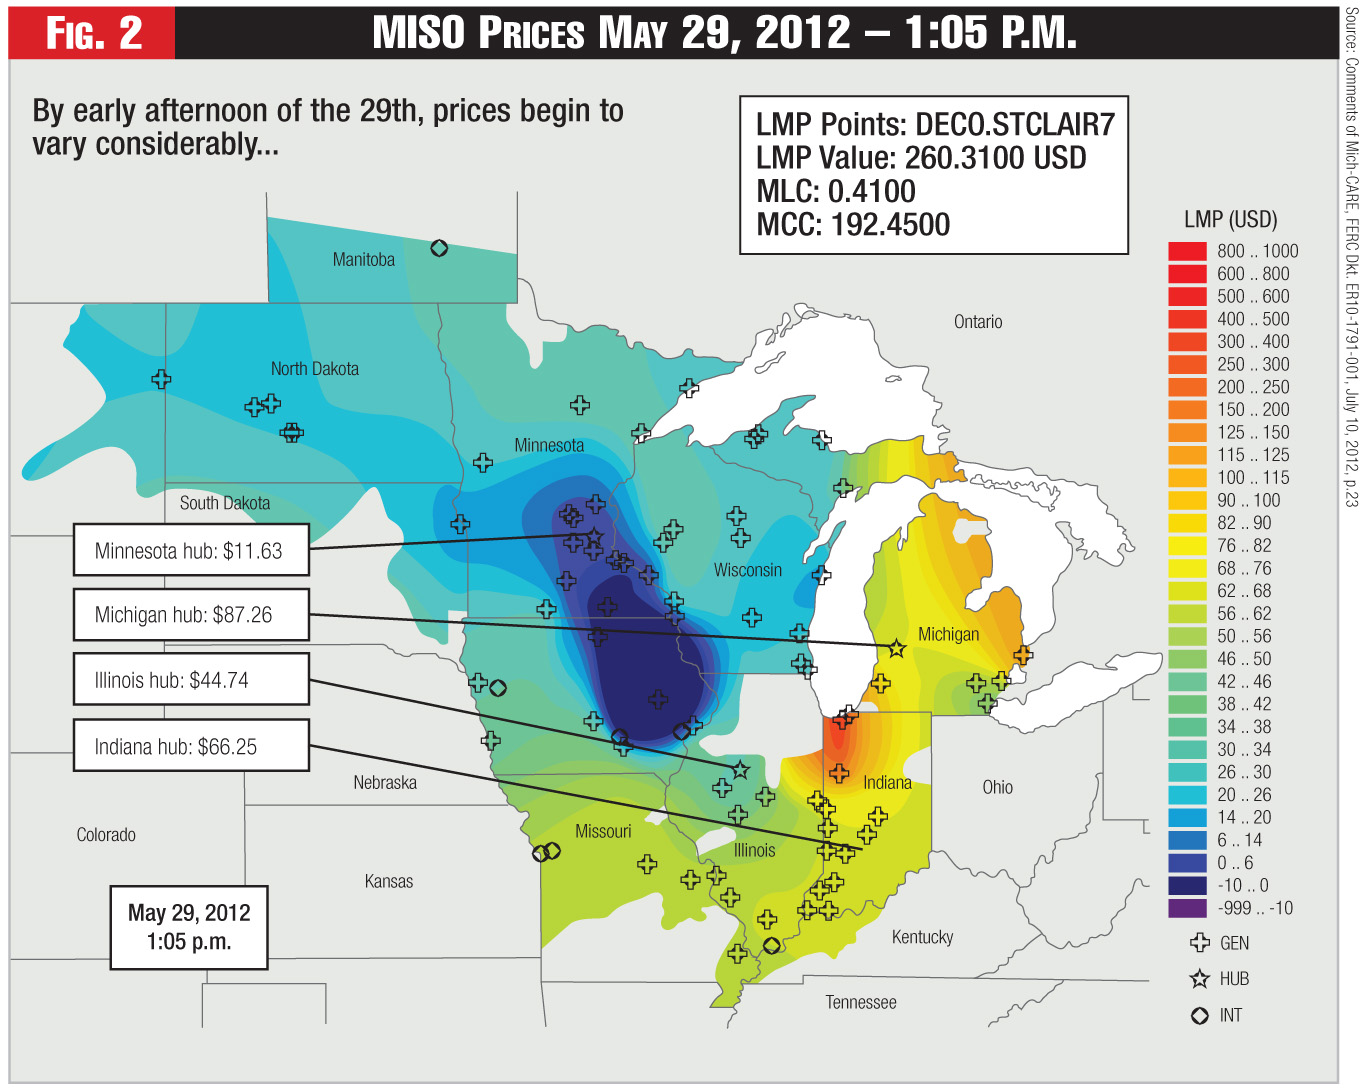 Figure 2 - MISO Prices May 29, 2012 – 1:05 P.M.